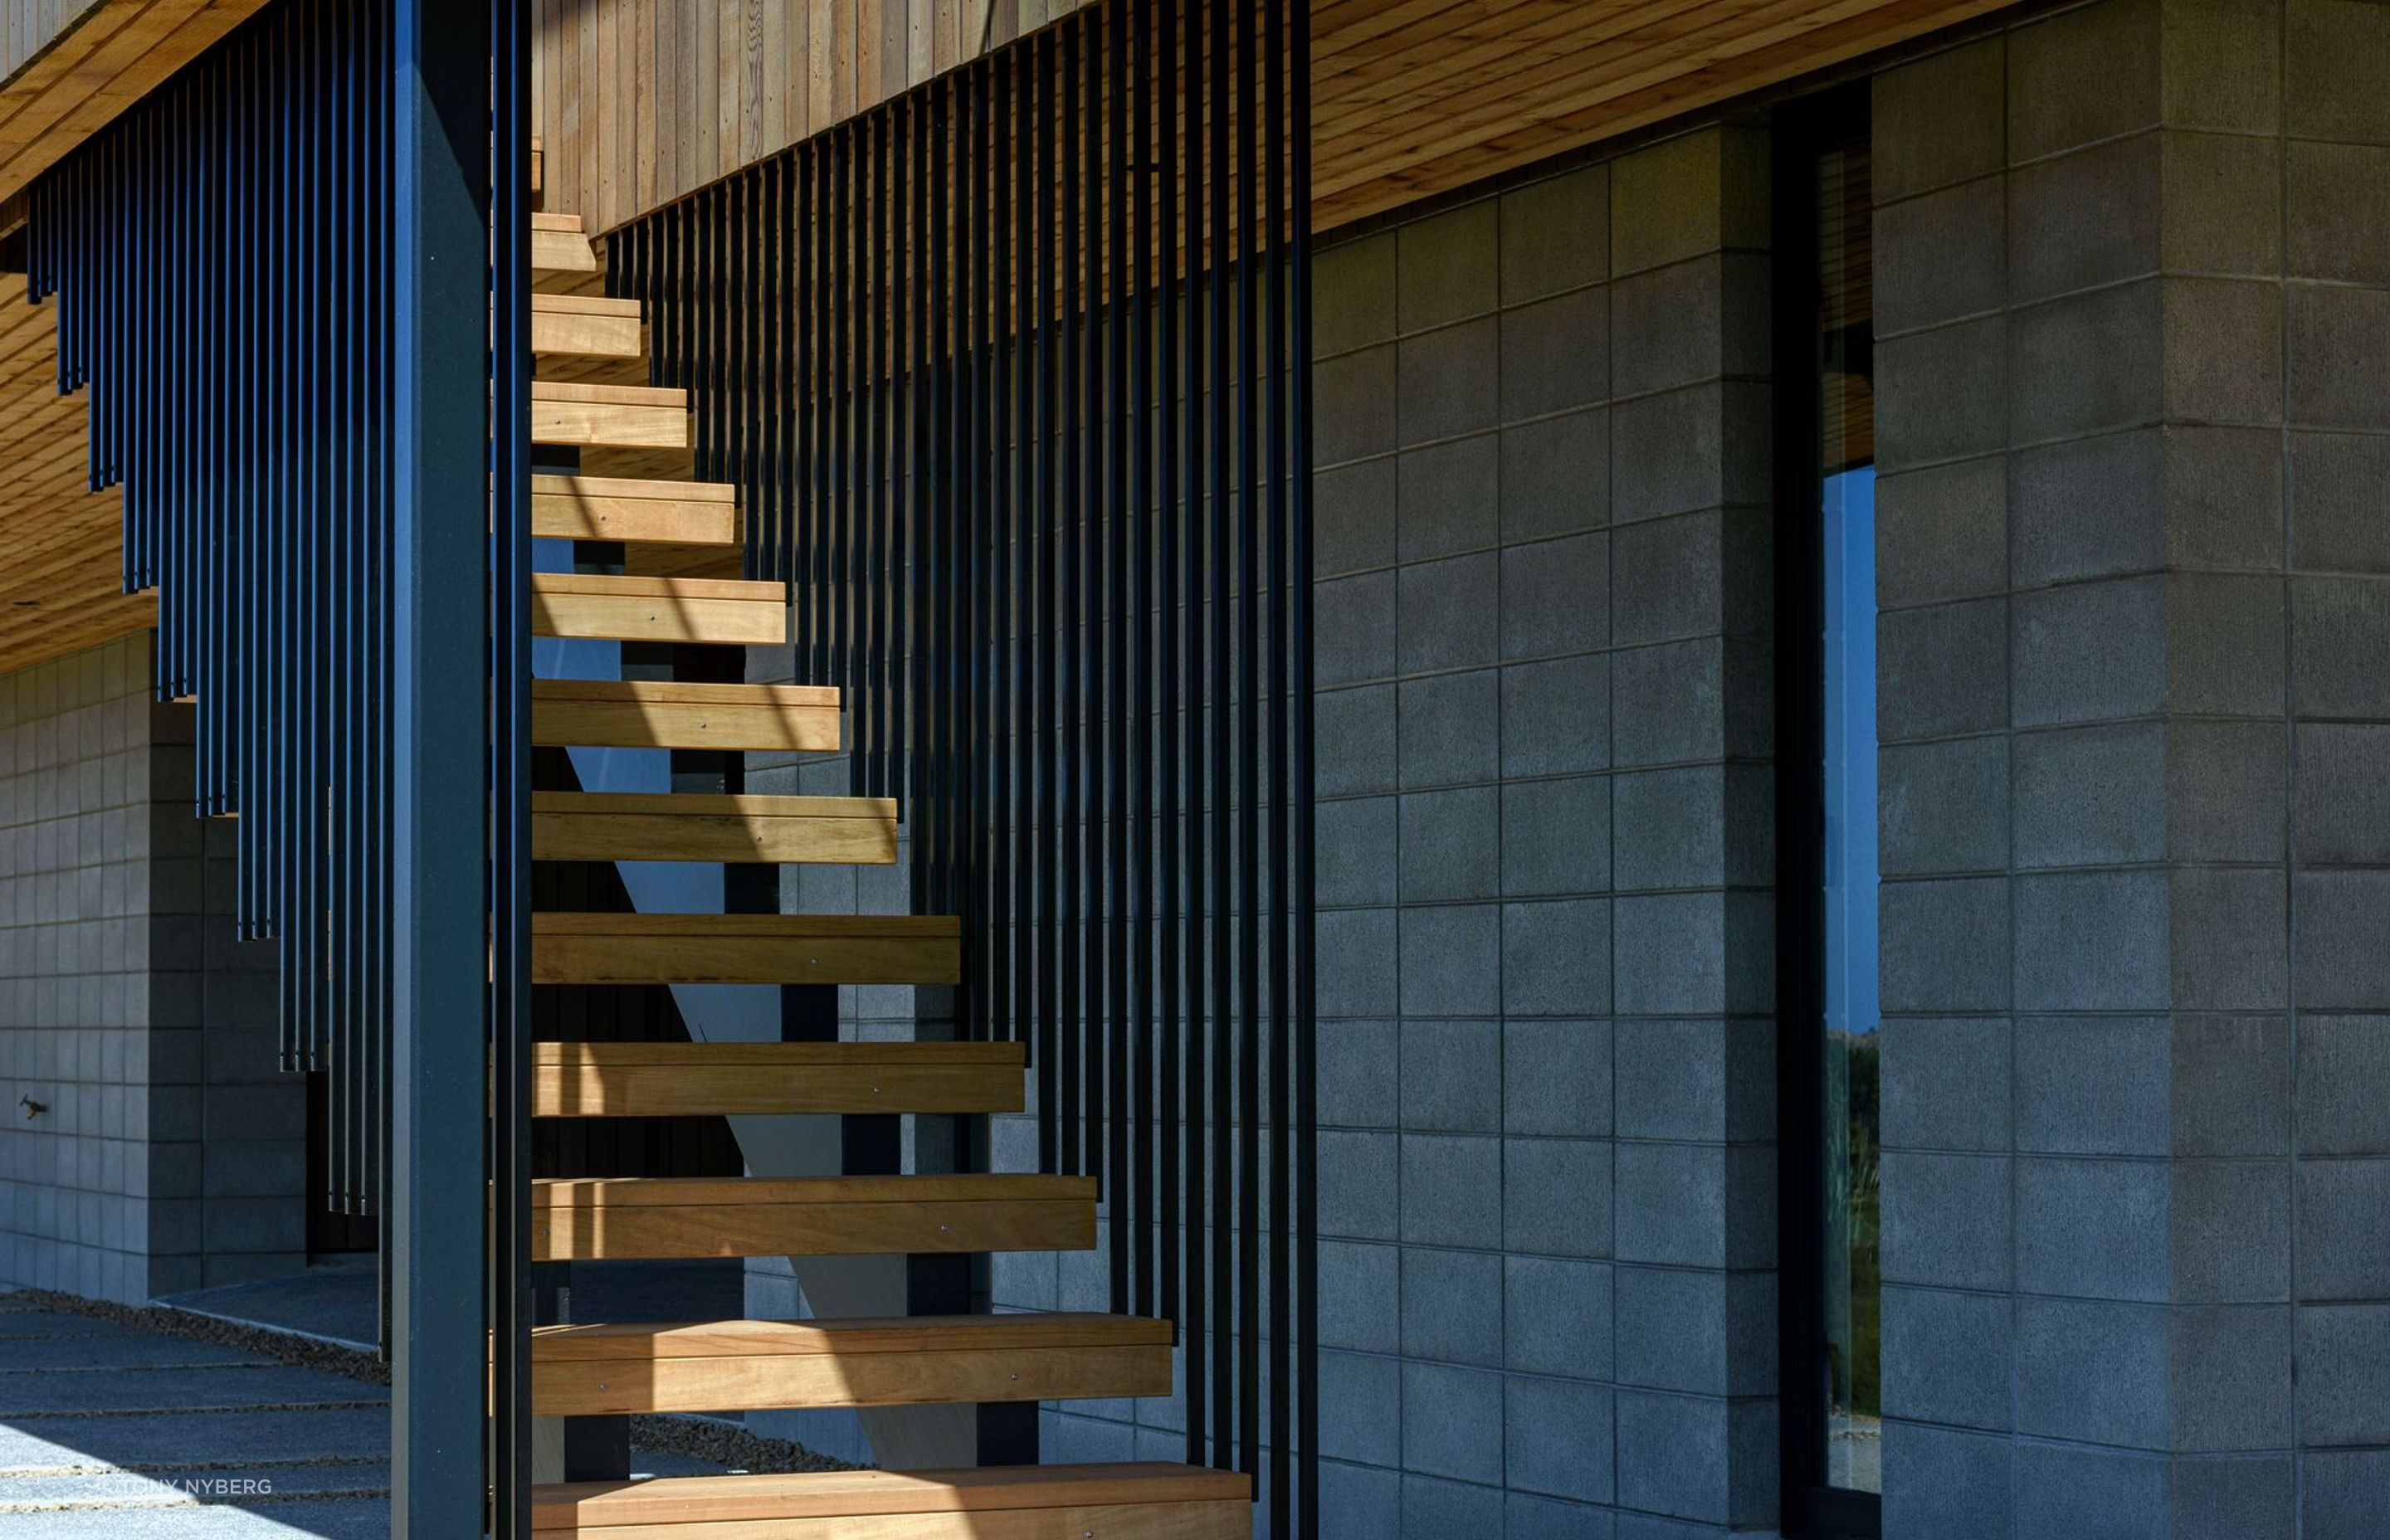 A block base combines with black aluminium and cedar for the home's exterior.